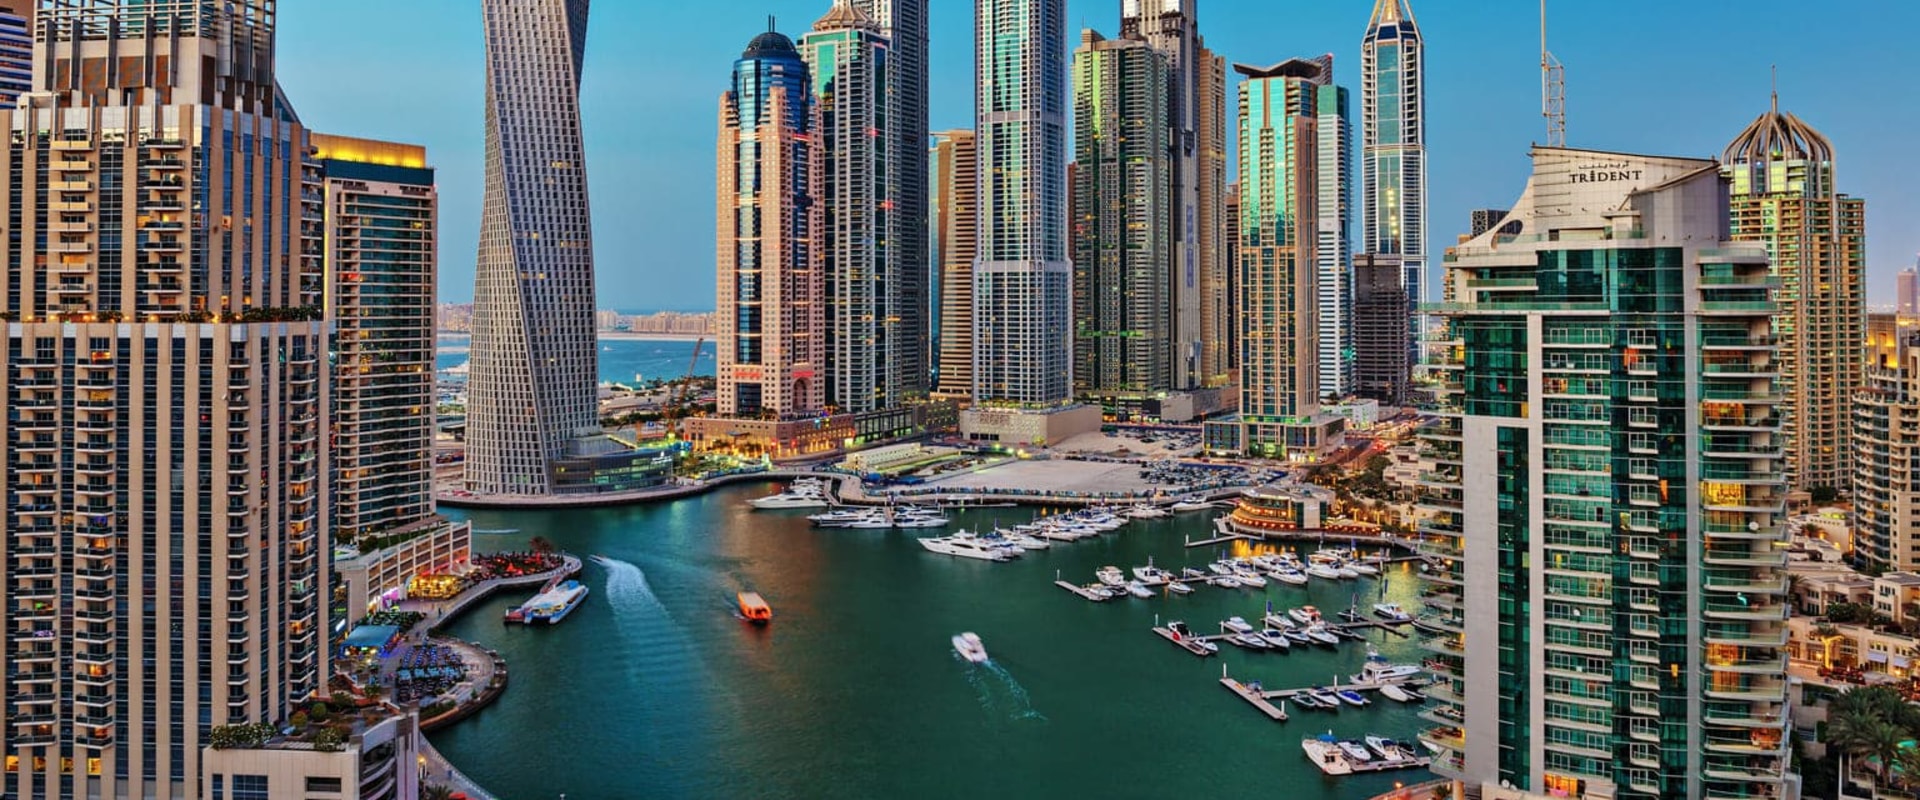 How to Launch a Business in Dubai as a Foreigner